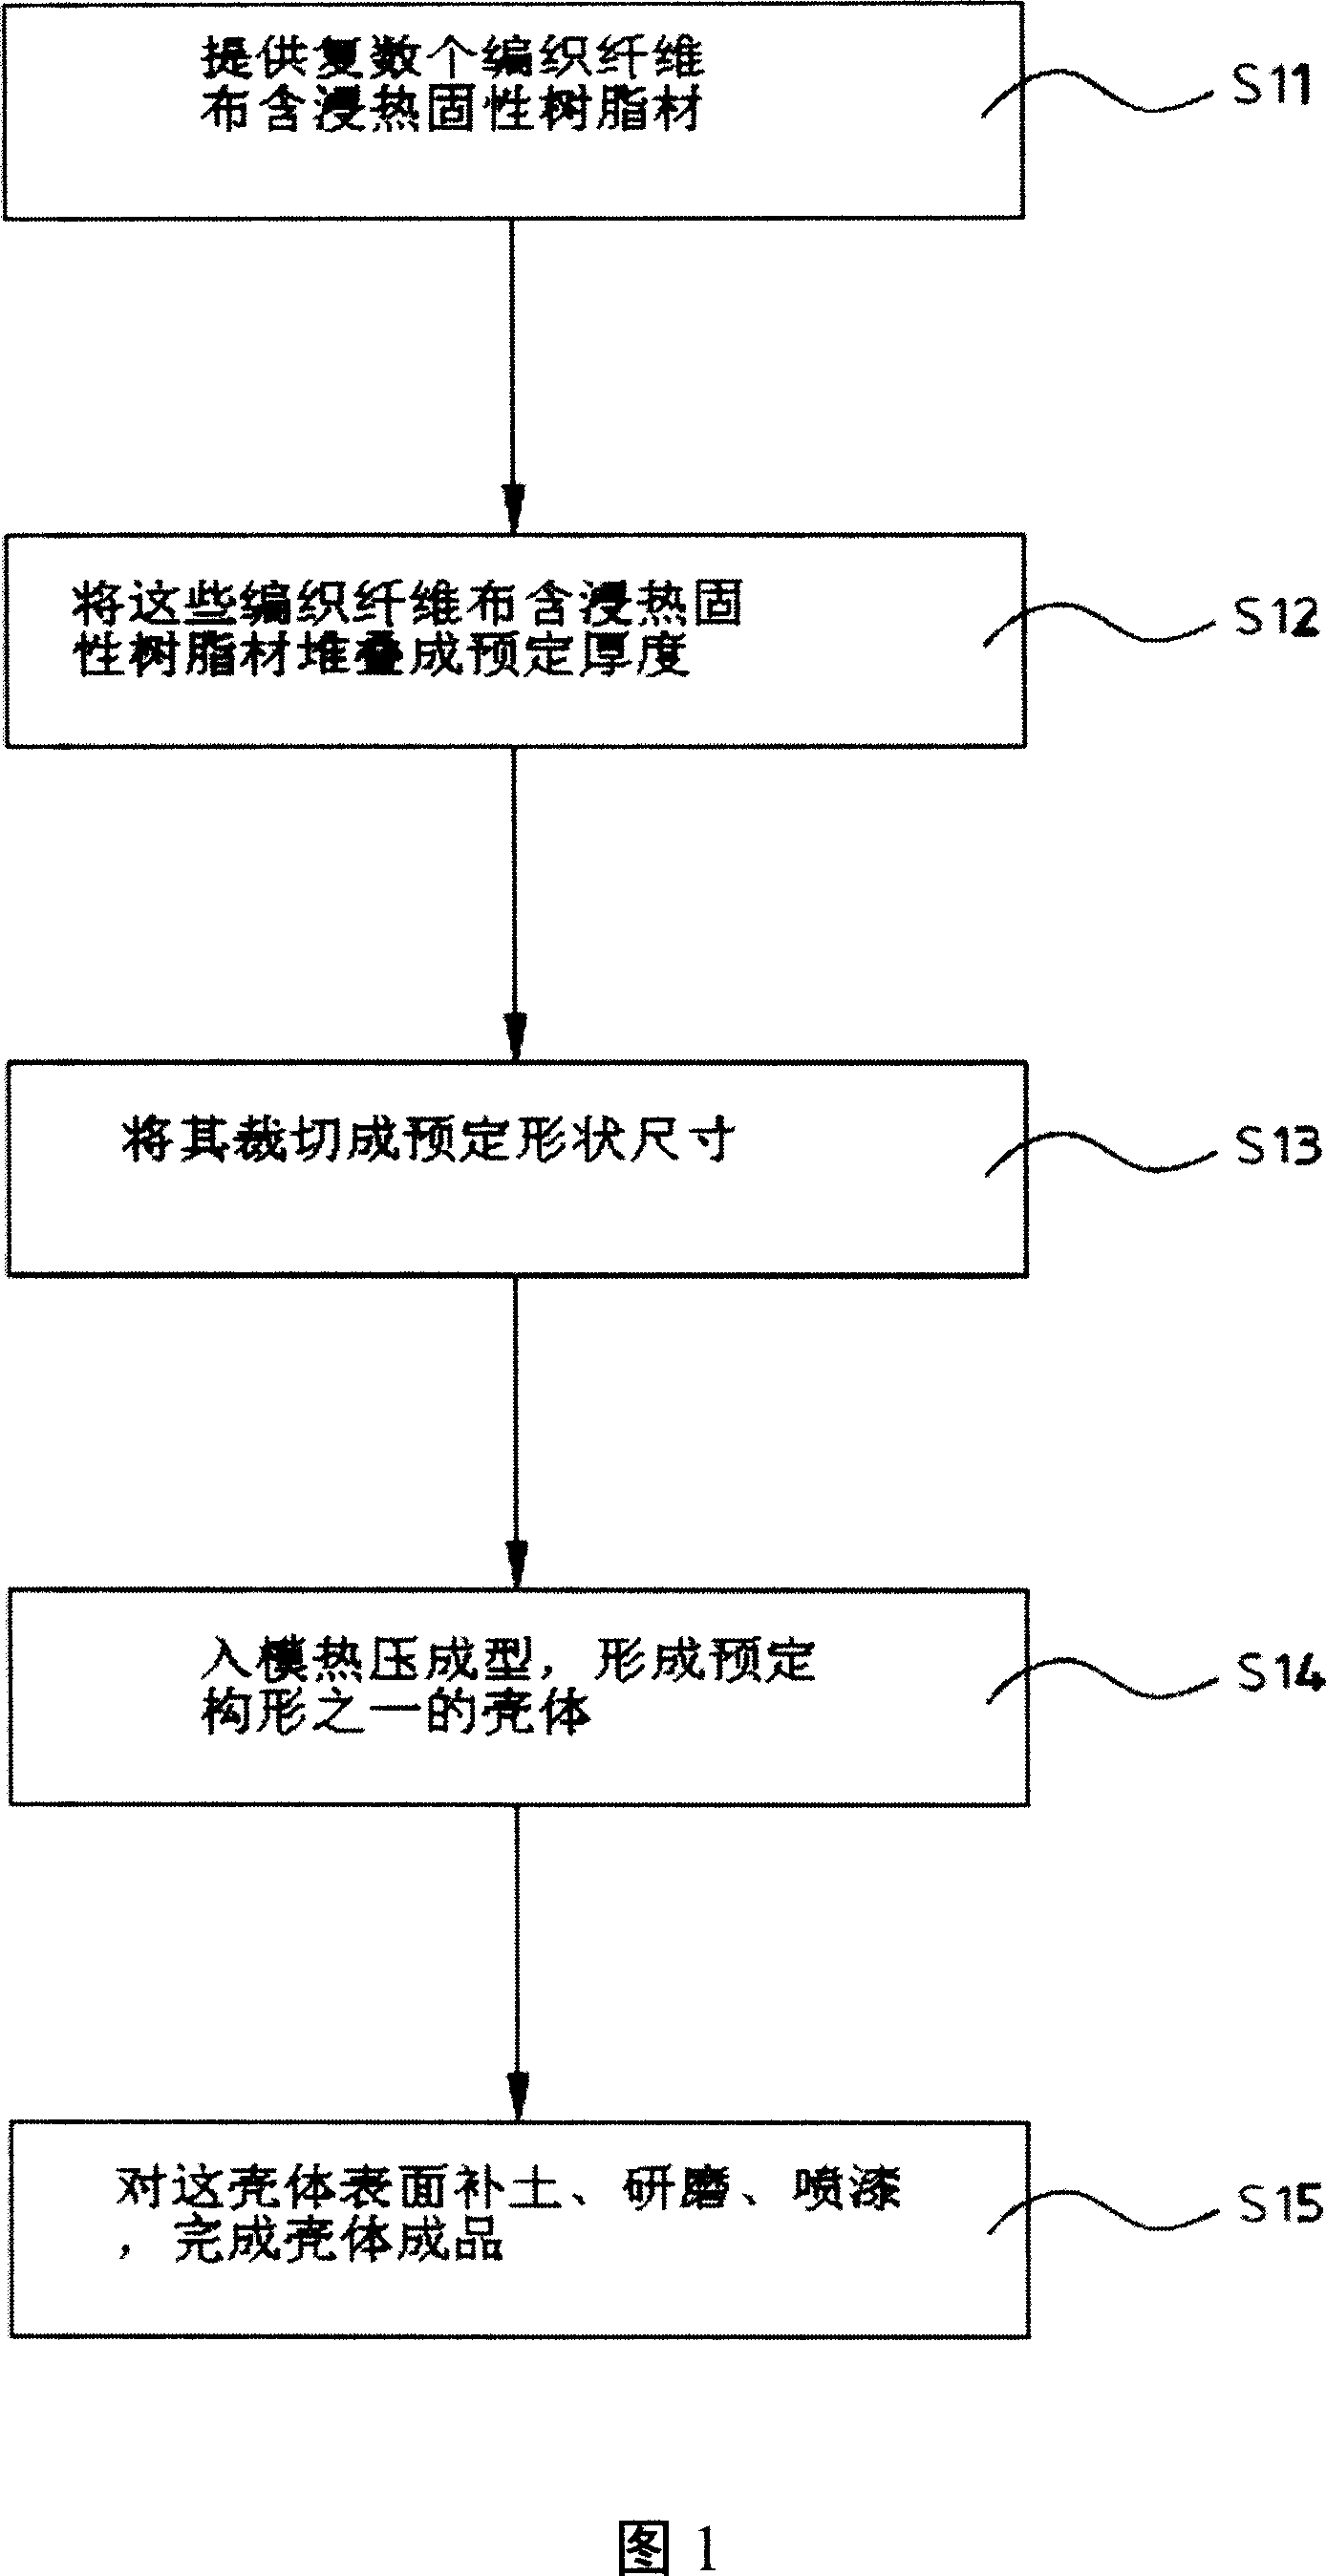 Method for manufacturing casing with textile fiber grain